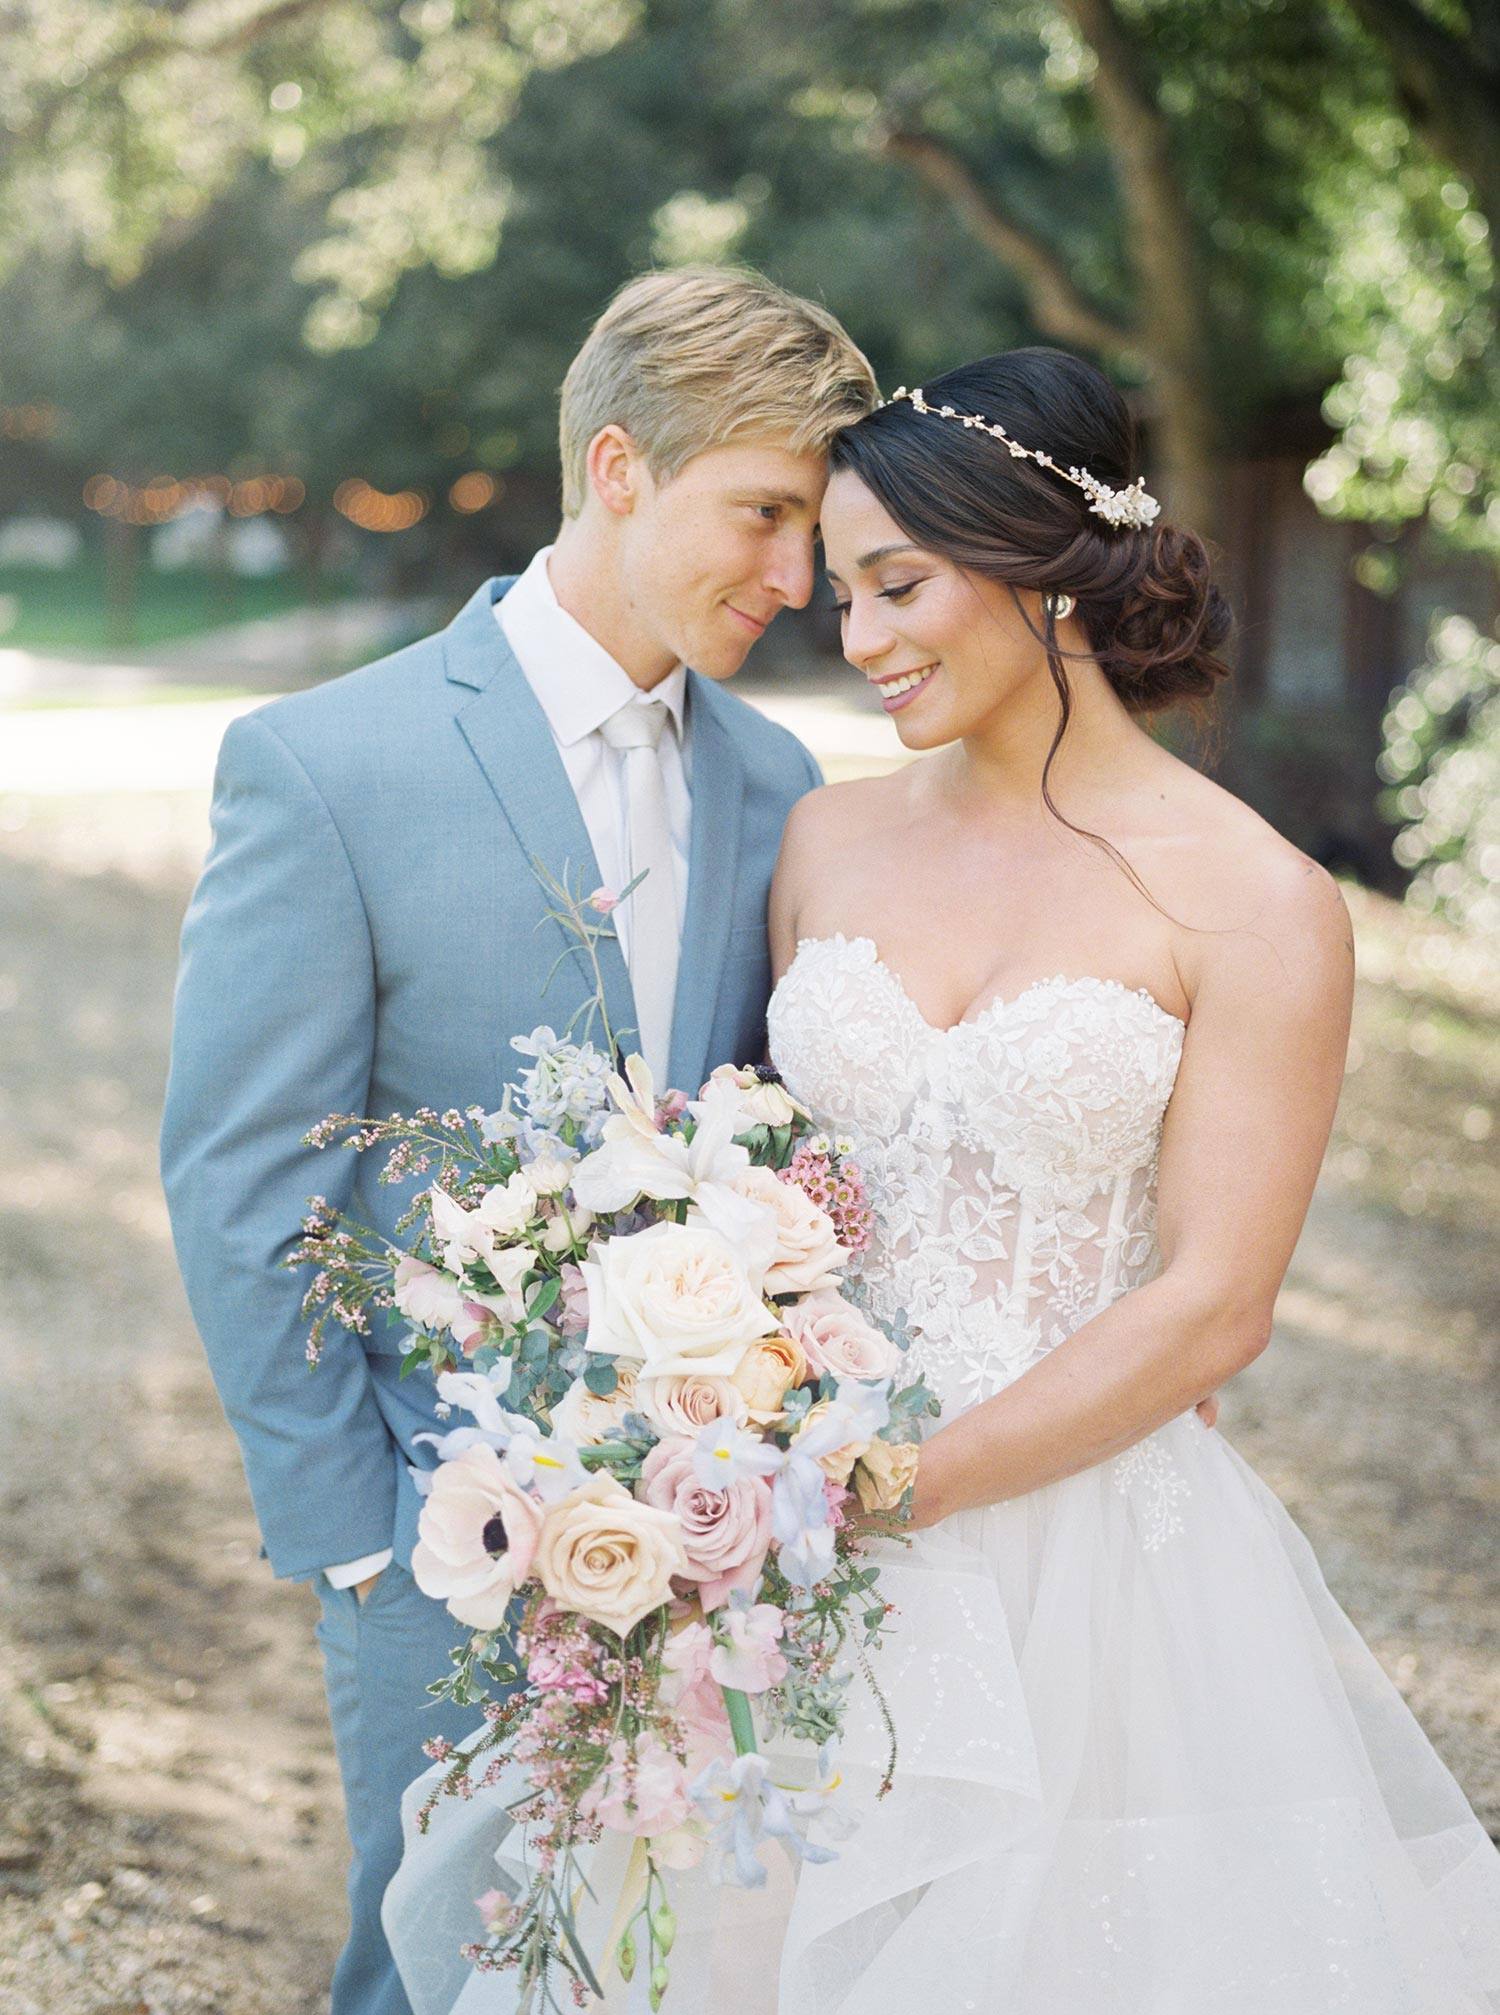 How to Match Groom Attire With Your Gown and Wedding Style